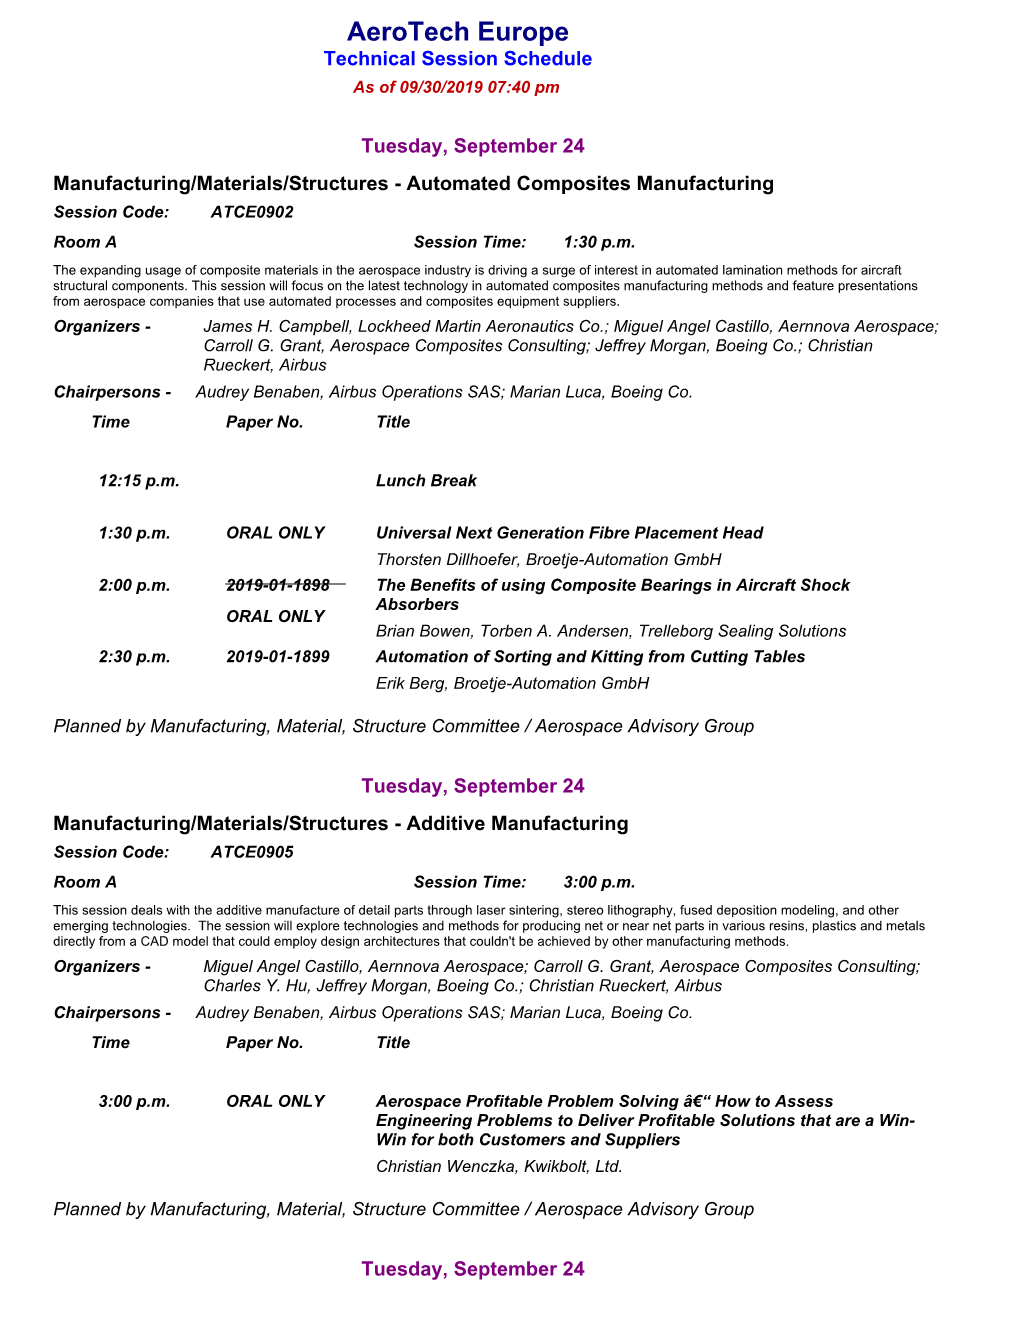 Aerotech Europe Technical Session Schedule As of 09/30/2019 07:40 Pm